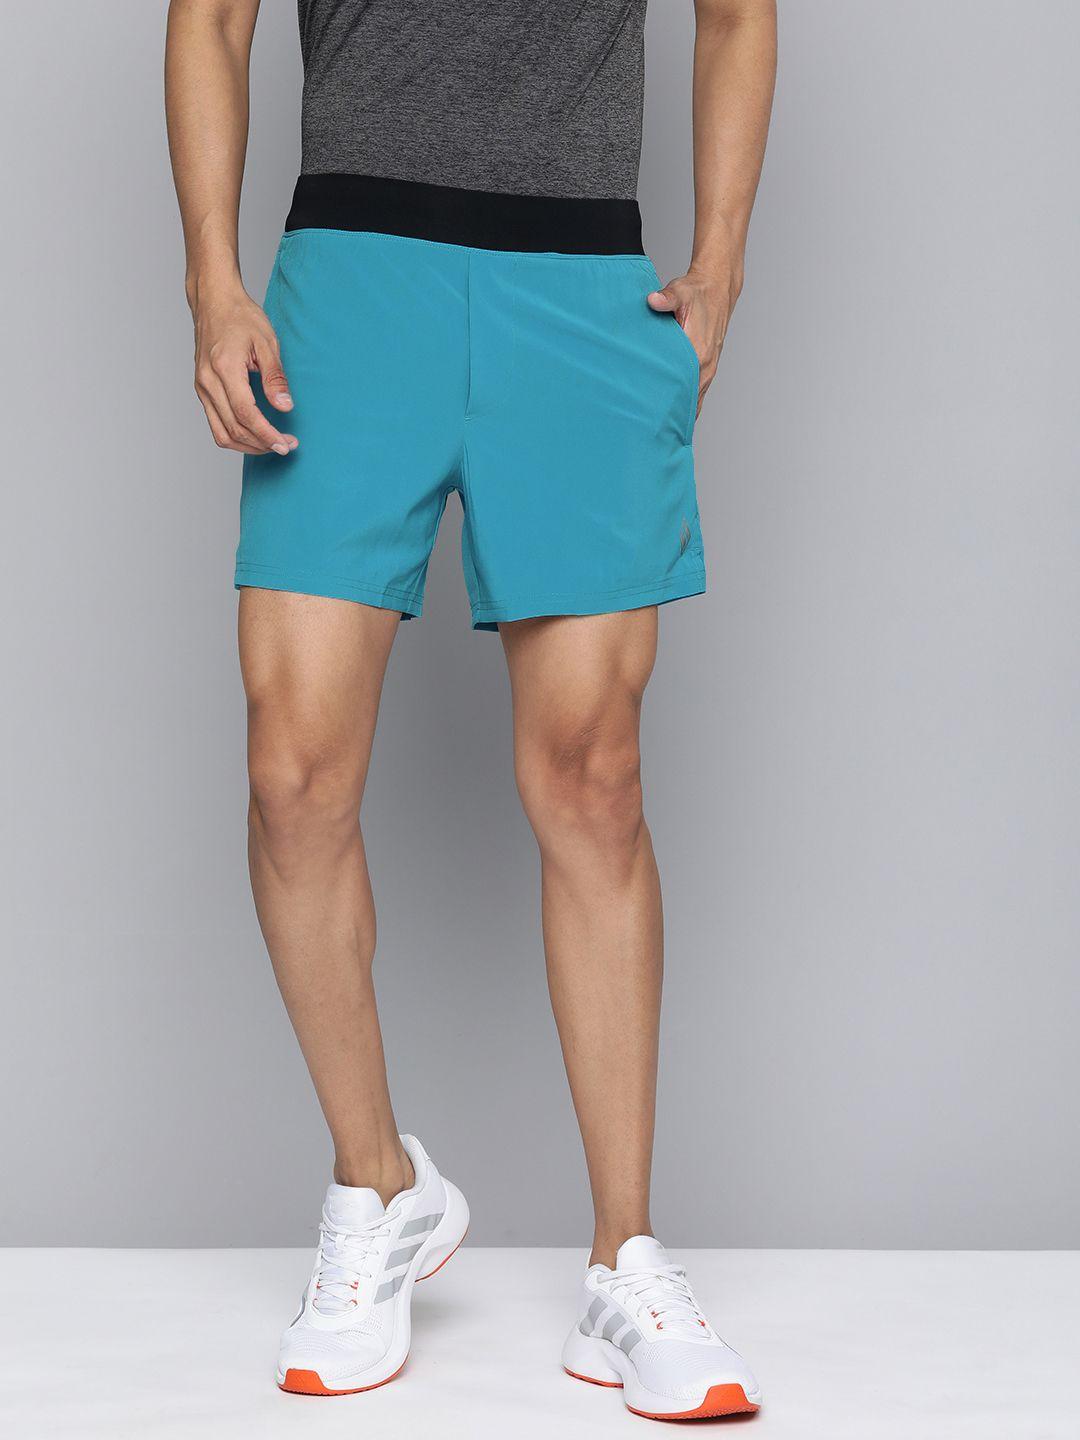 skechers-men-movement-5in-e-dry-technology-sports-shorts-with-attached-inner-brief